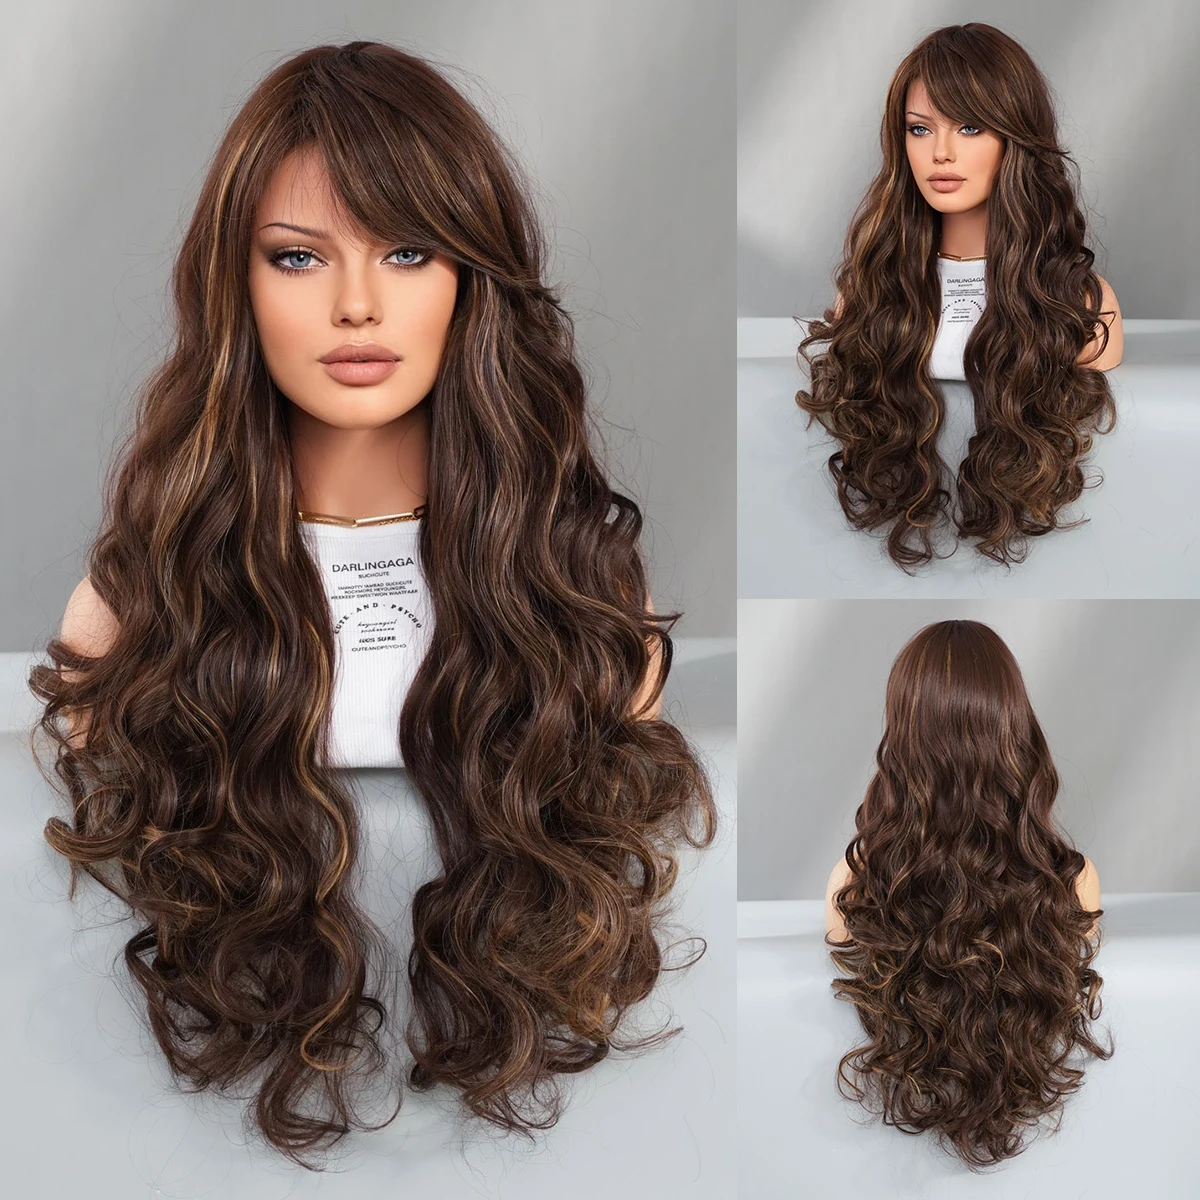 

PARK YUN Long Curly Reddish Brown Wig For Women Daily Party Cosplay Highlight Blonde Synthetic Loose Curly Wigs With Bangs